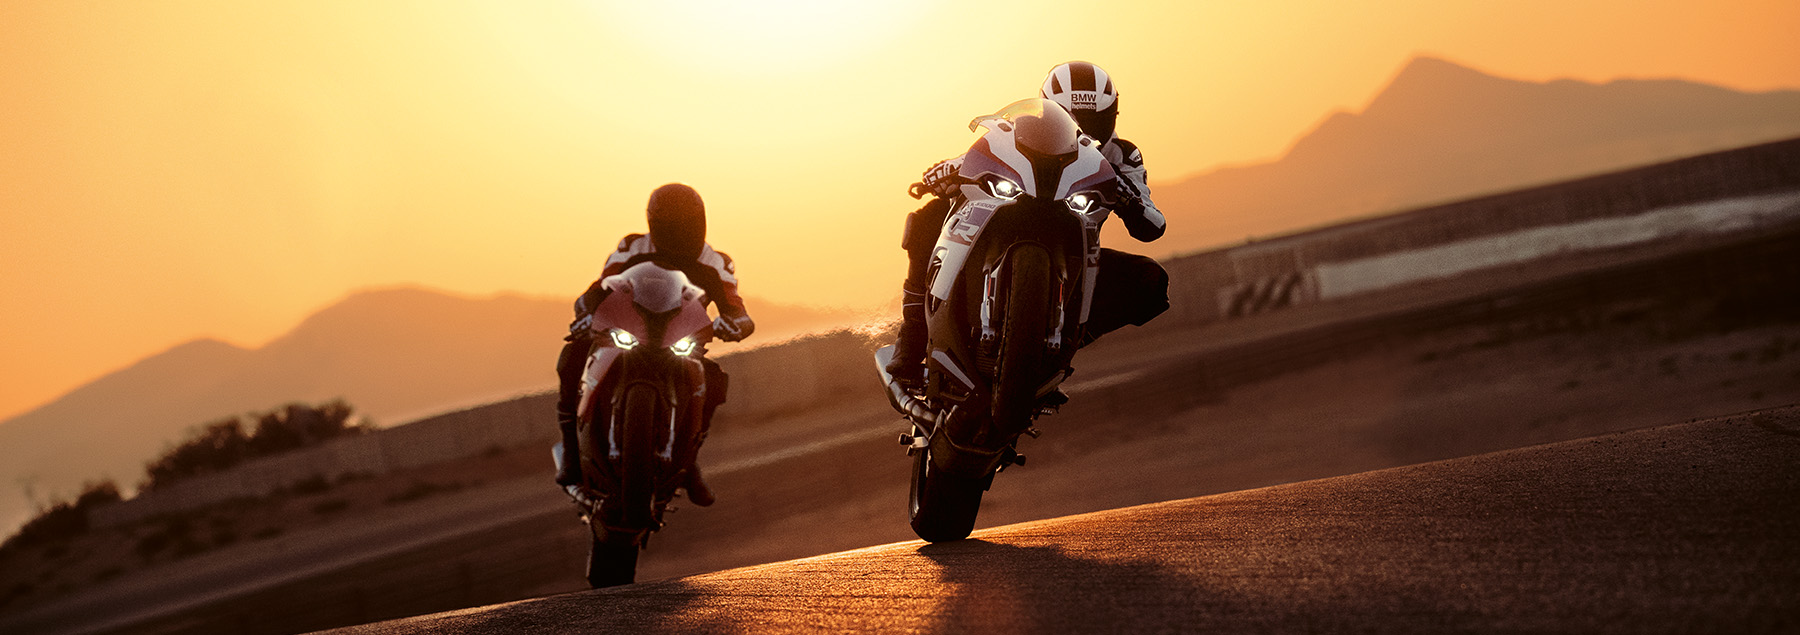 Two BMW Motorcycles riding during sunset in Southern California.